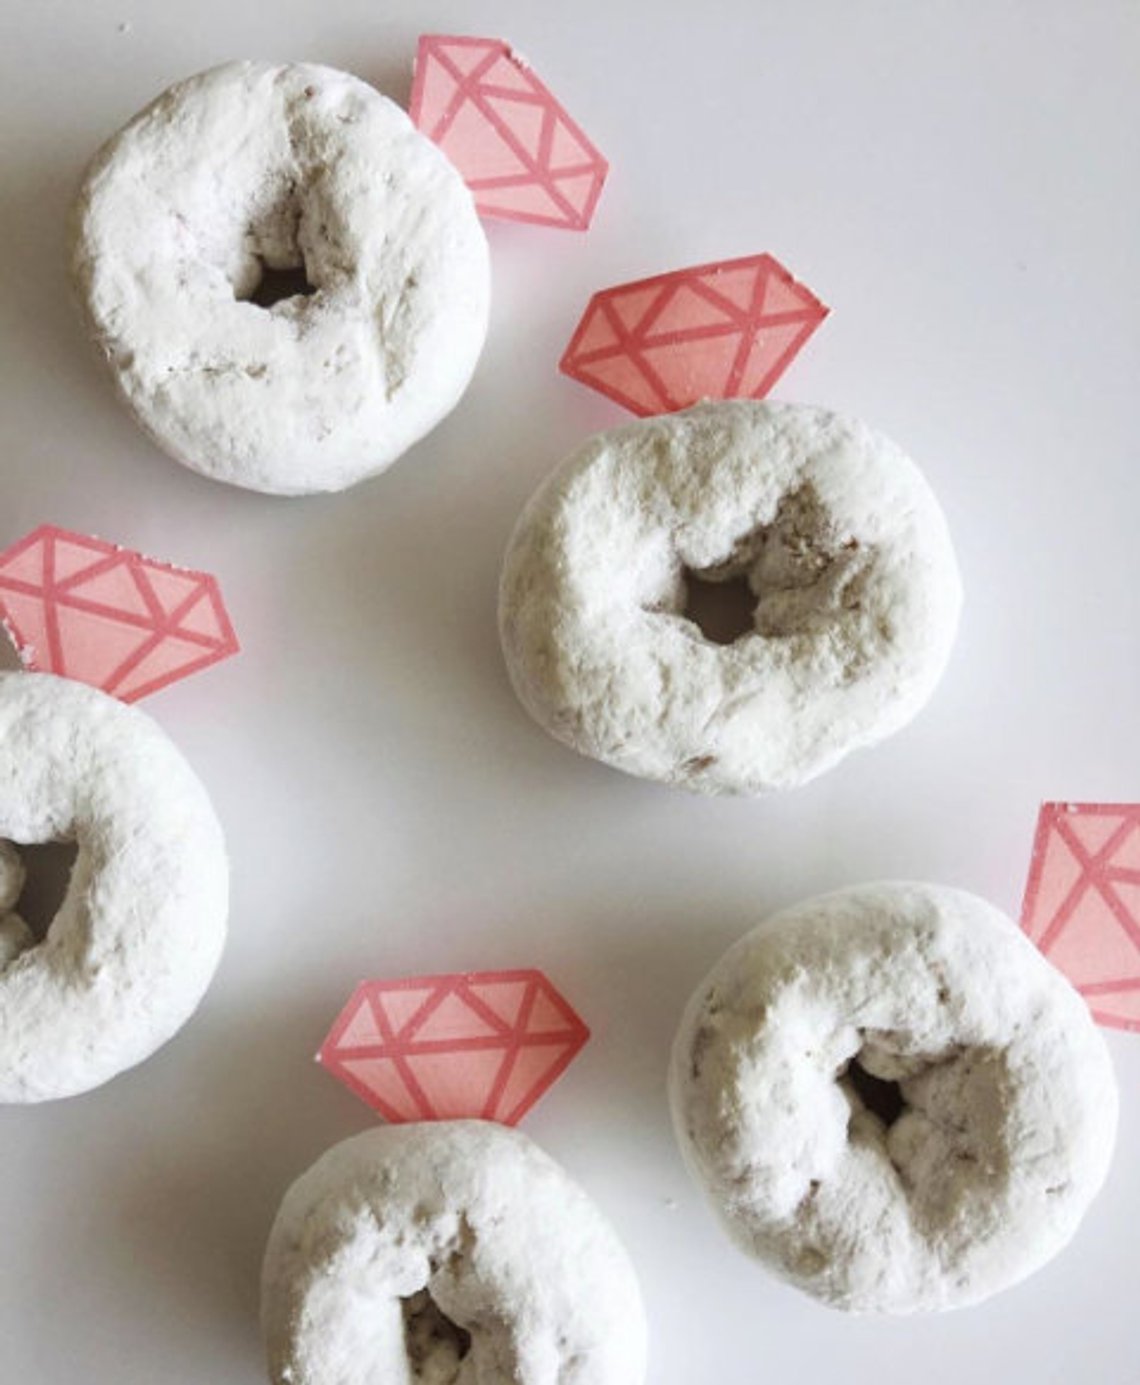 Powdered doughnuts with diamond decorations as an engagement party idea